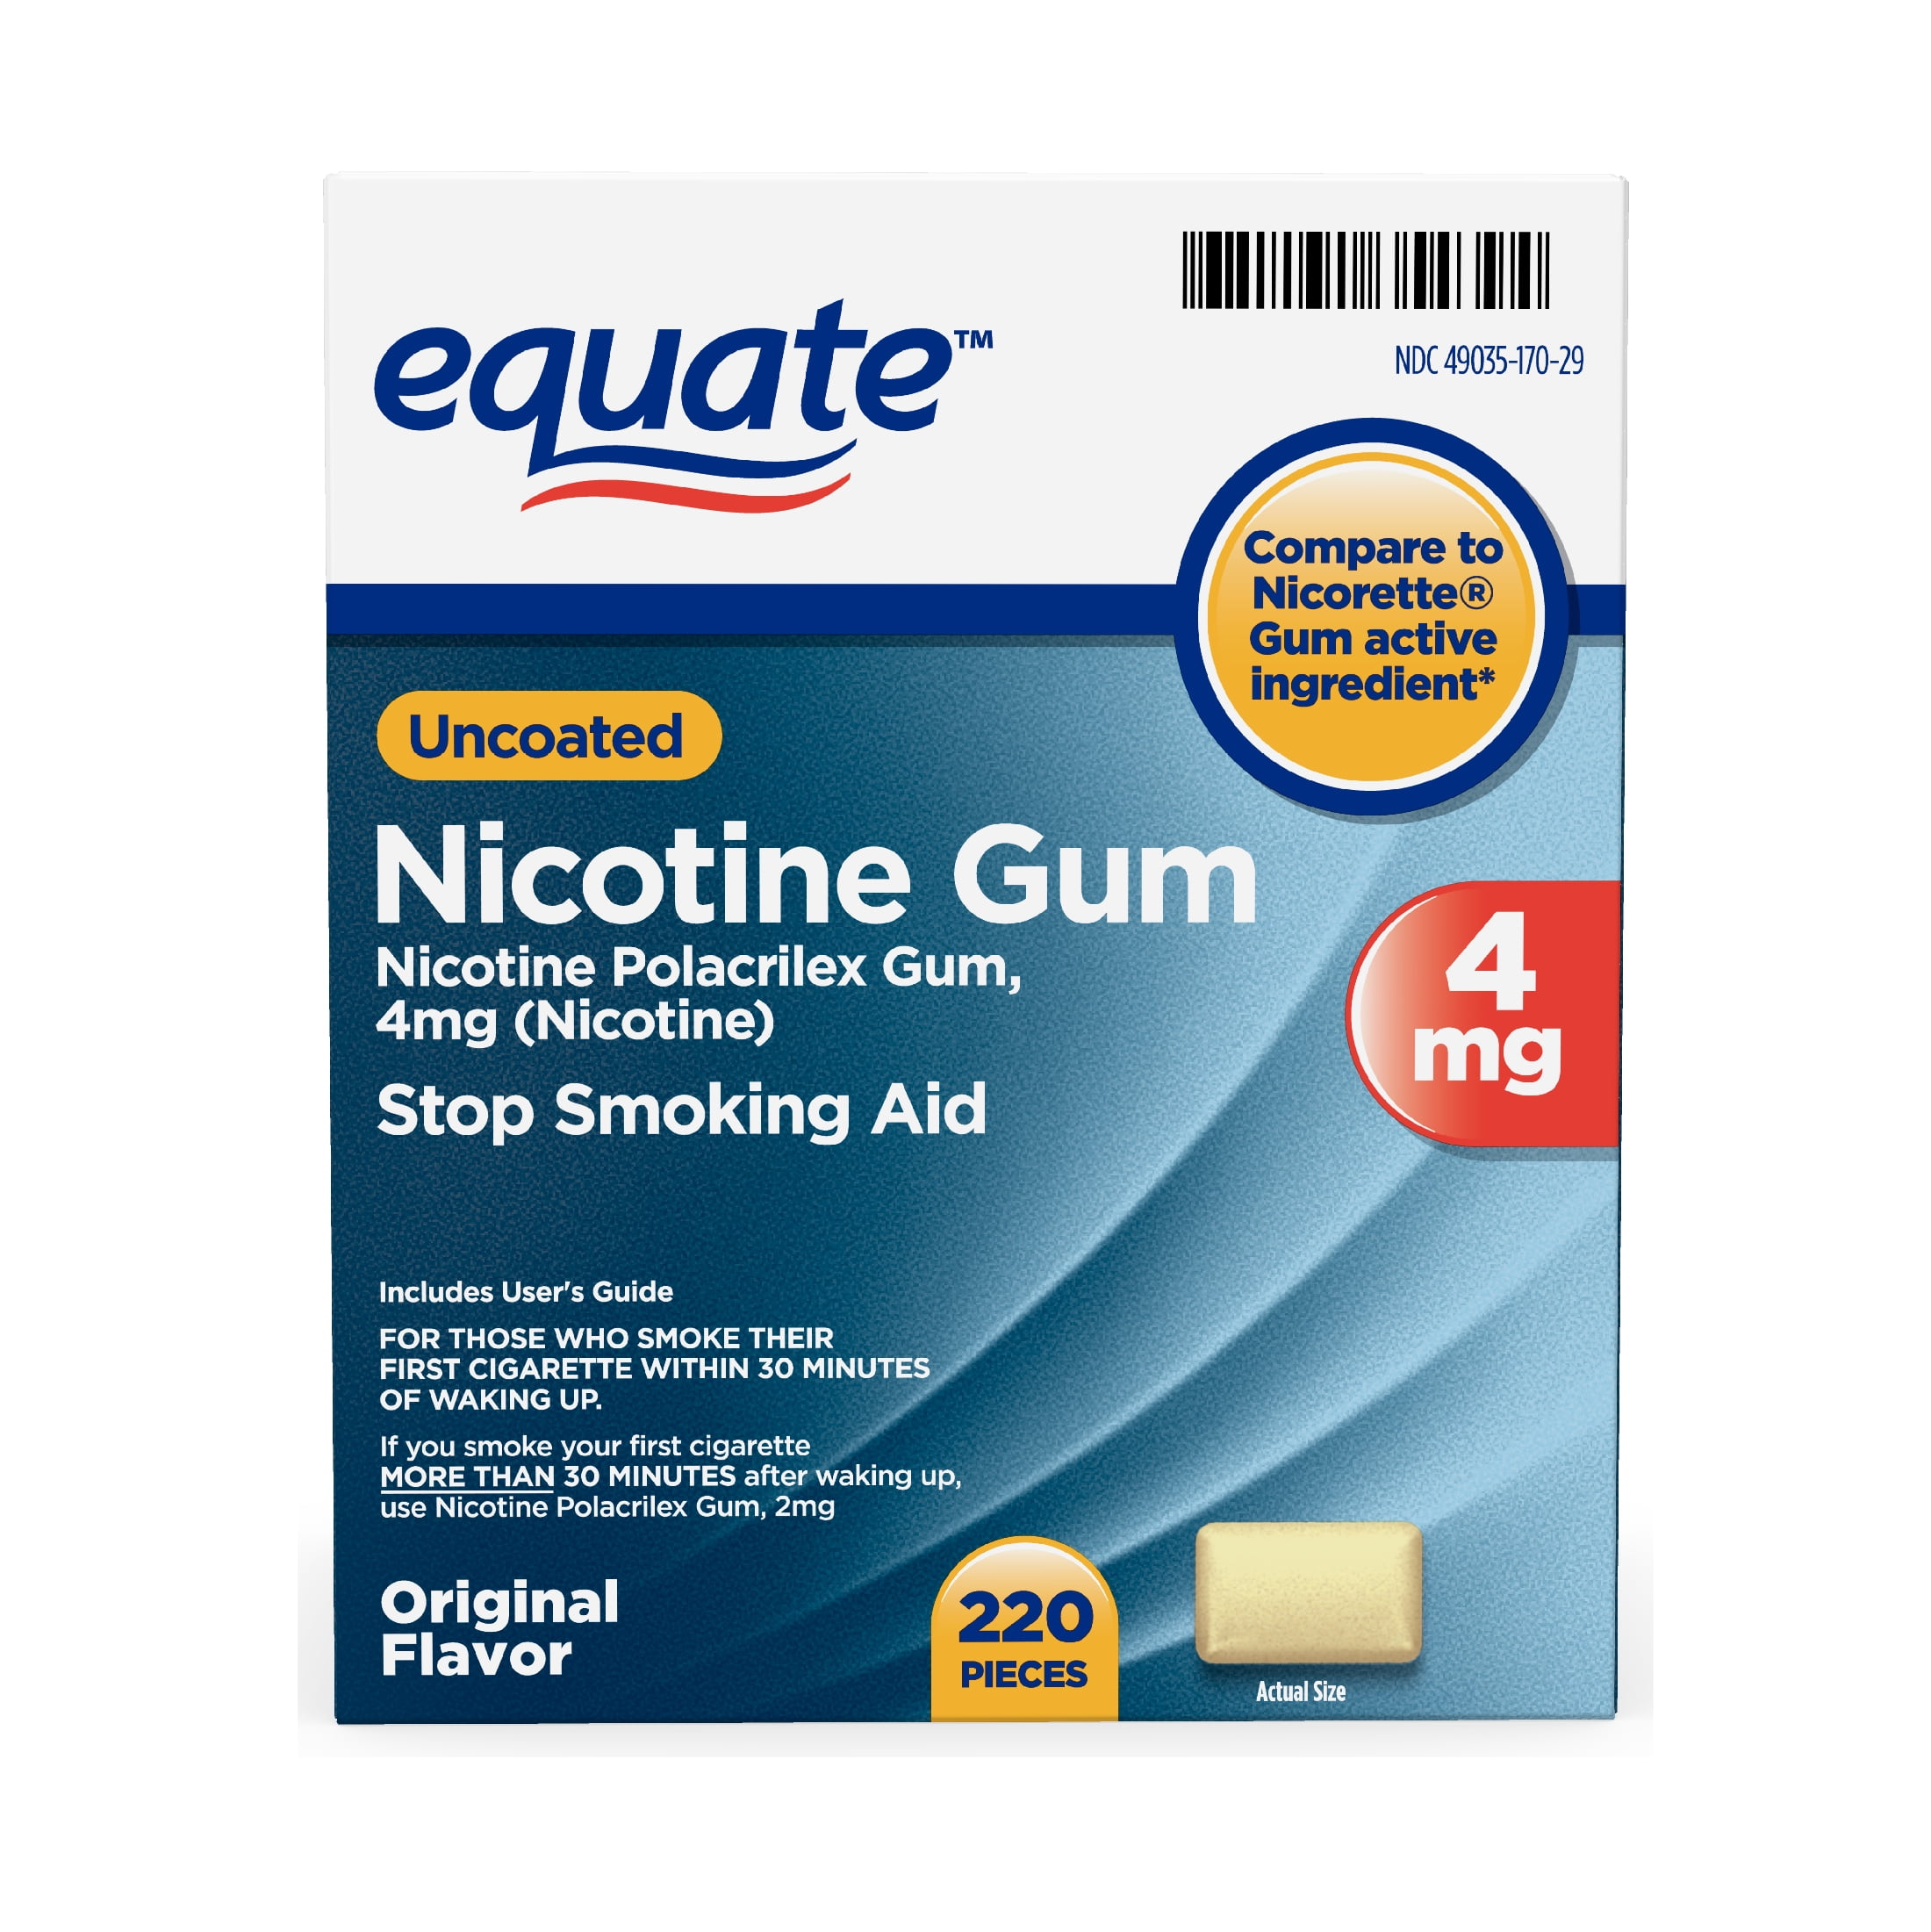 Equate Nicotine Uncoated Gum 4 mg, Original Flavor, 220 Count